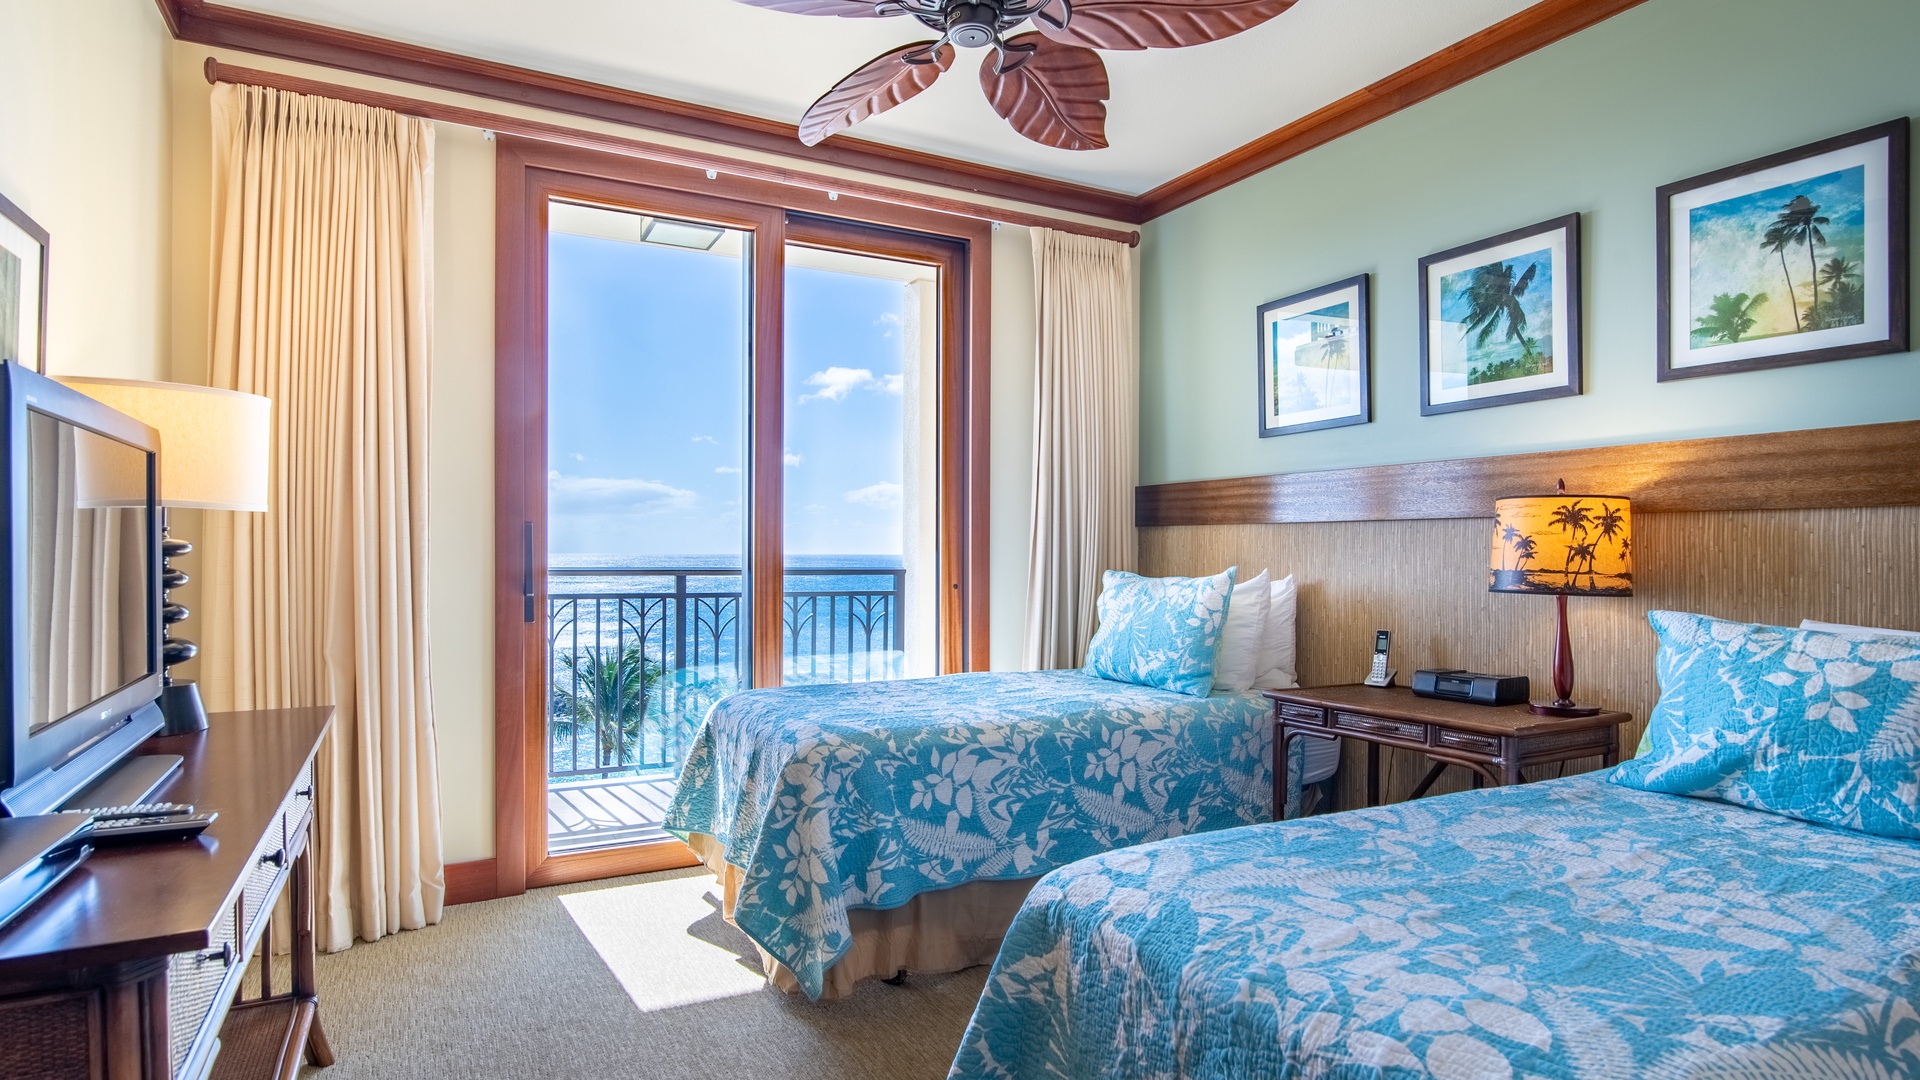 Kapolei Vacation Rentals, Ko Olina Beach Villas B609 - The second guest bedroom has an ocean view and access to the lanai.